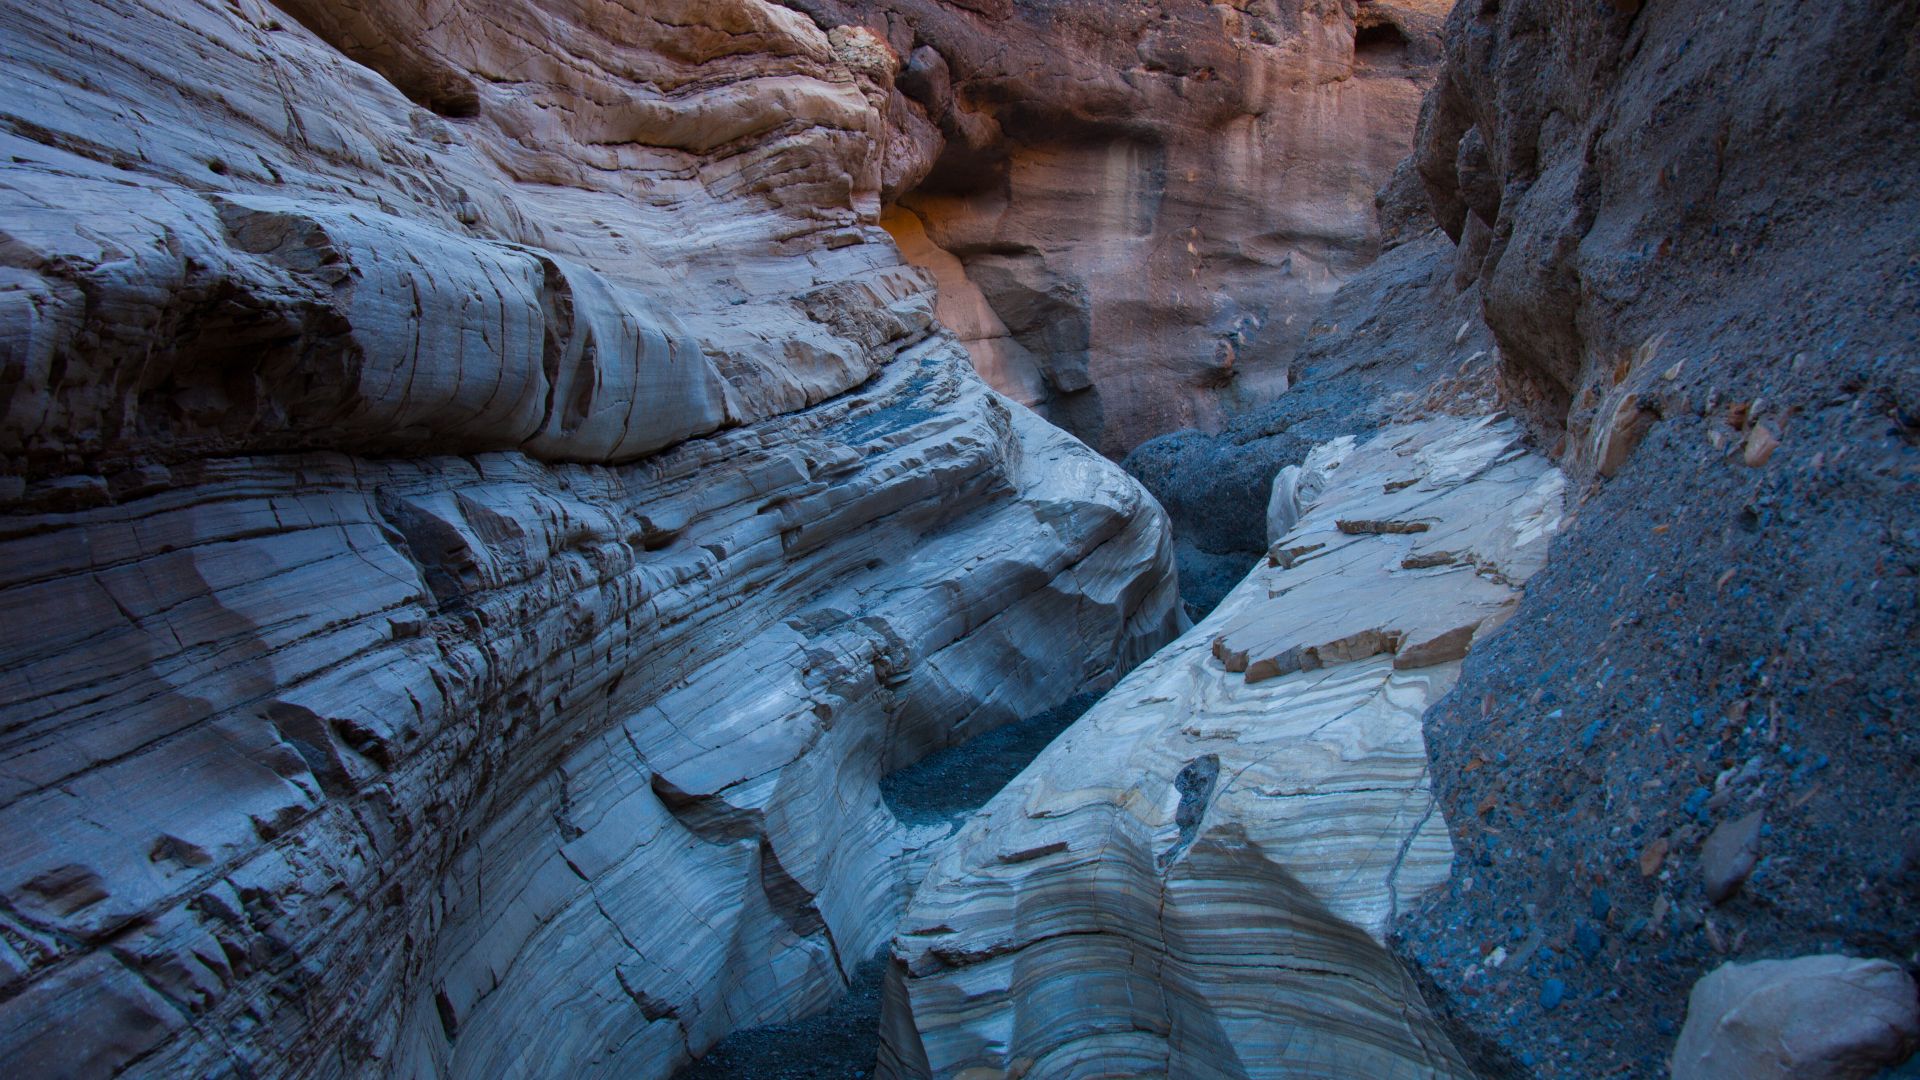 <p>                     <strong>Distance: </strong>3.5 miles<br> <strong>Difficult: </strong>Moderate                   </p>                                      <p>                     Mosaic Canyon is a fascinating slot canyon that gives you a taste of canyoneering without requiring equipment or experience. This canyon is formed of a natural, cement-like substance that holds fragments of many types of rock giving the appearance of small, colorful tiles. The hike starts out with a wide wash but quickly leads you to the exciting, narrow winding passageway of the canyon. Upon encountering a large boulder that appears to be blocking your way, you can turn back or, with a little finesse, squeeze through and keep going. You’ll encounter another such obstacle a little further on but again, you can climb over it and keep going until you reach a small amphitheater where you can enjoy lunch before turning back.                    </p>